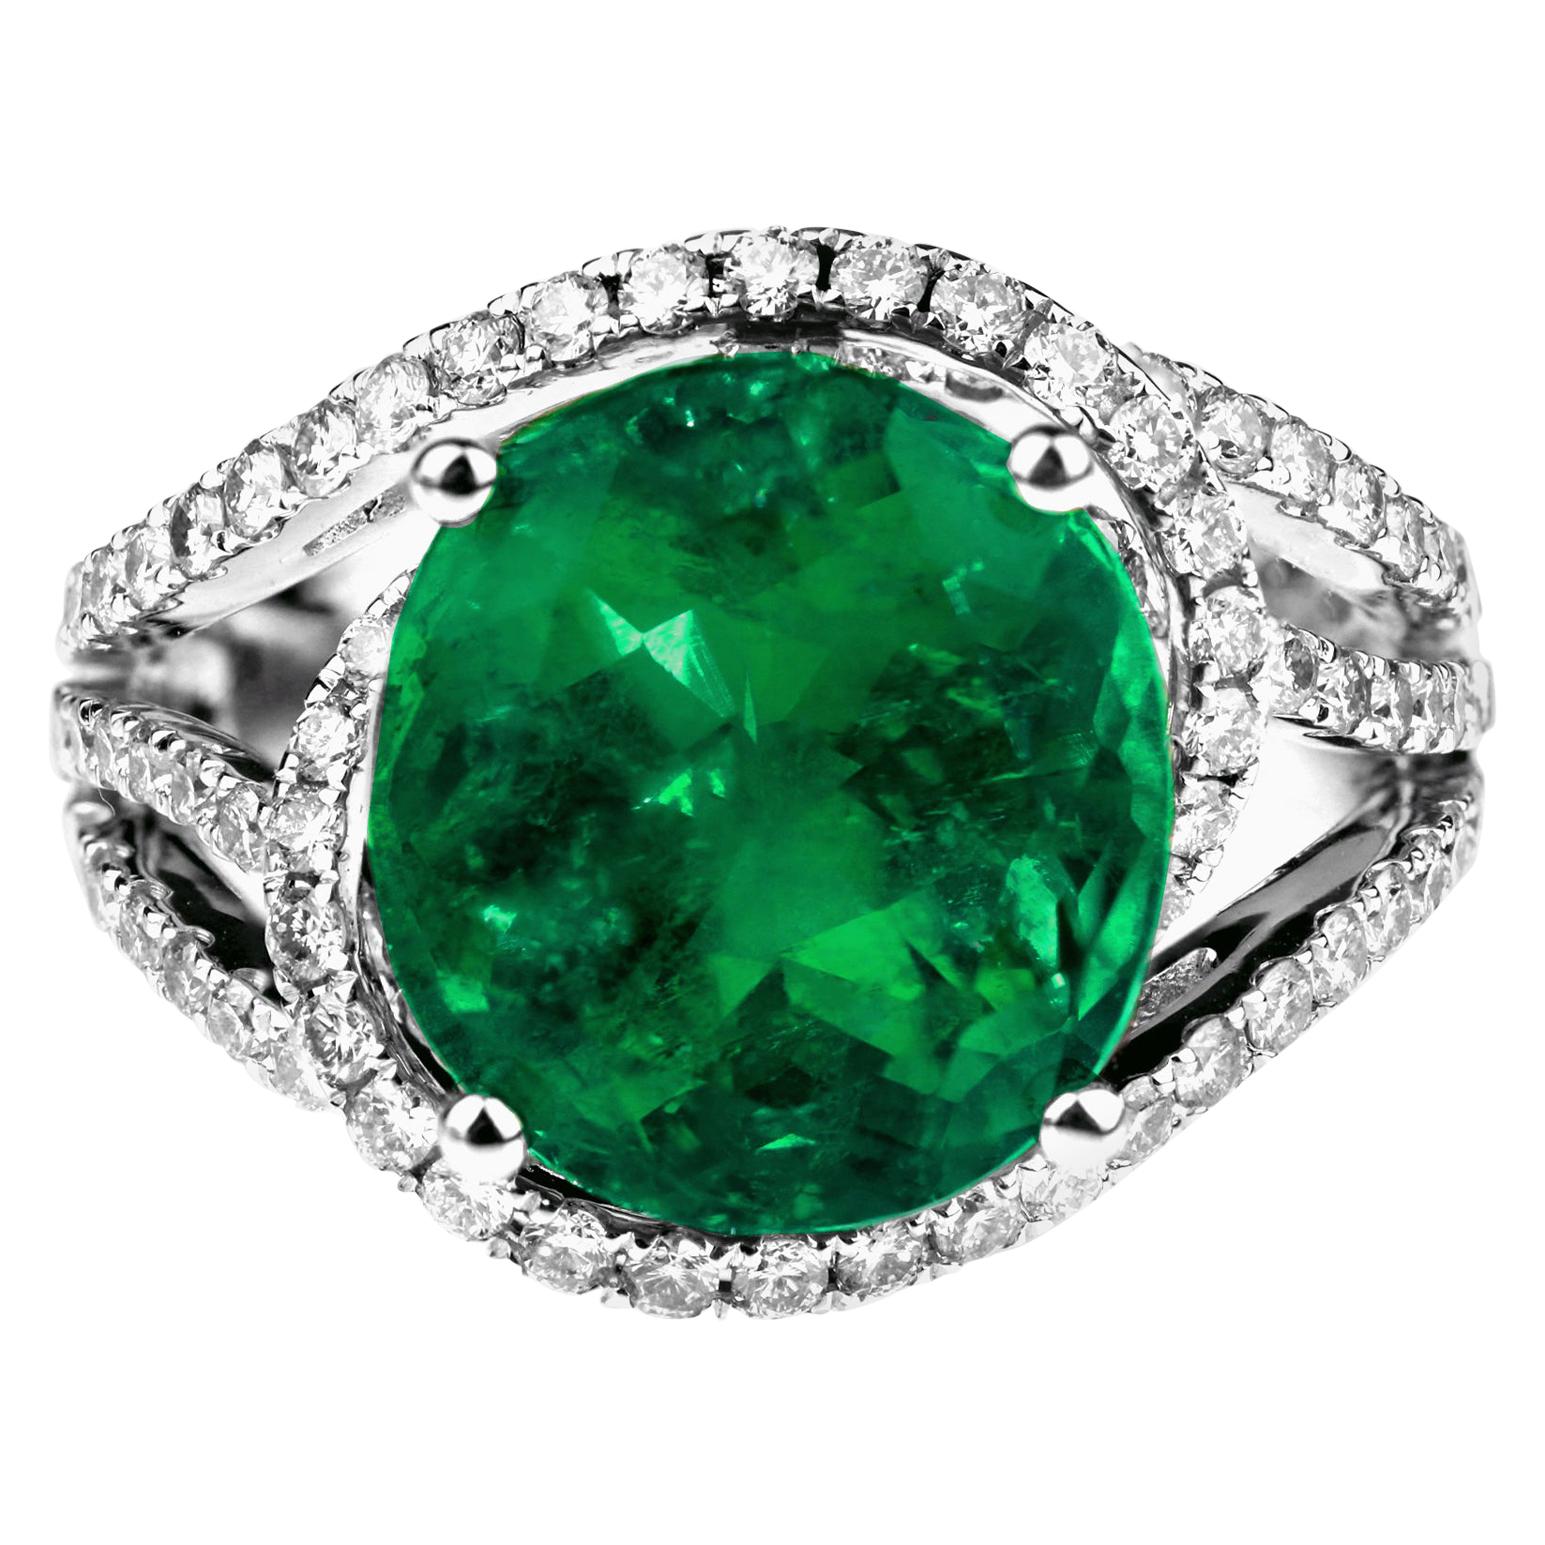 Certified Natural Colombian Emerald 5.3 ct and Diamond Ring in 18K White Gold For Sale